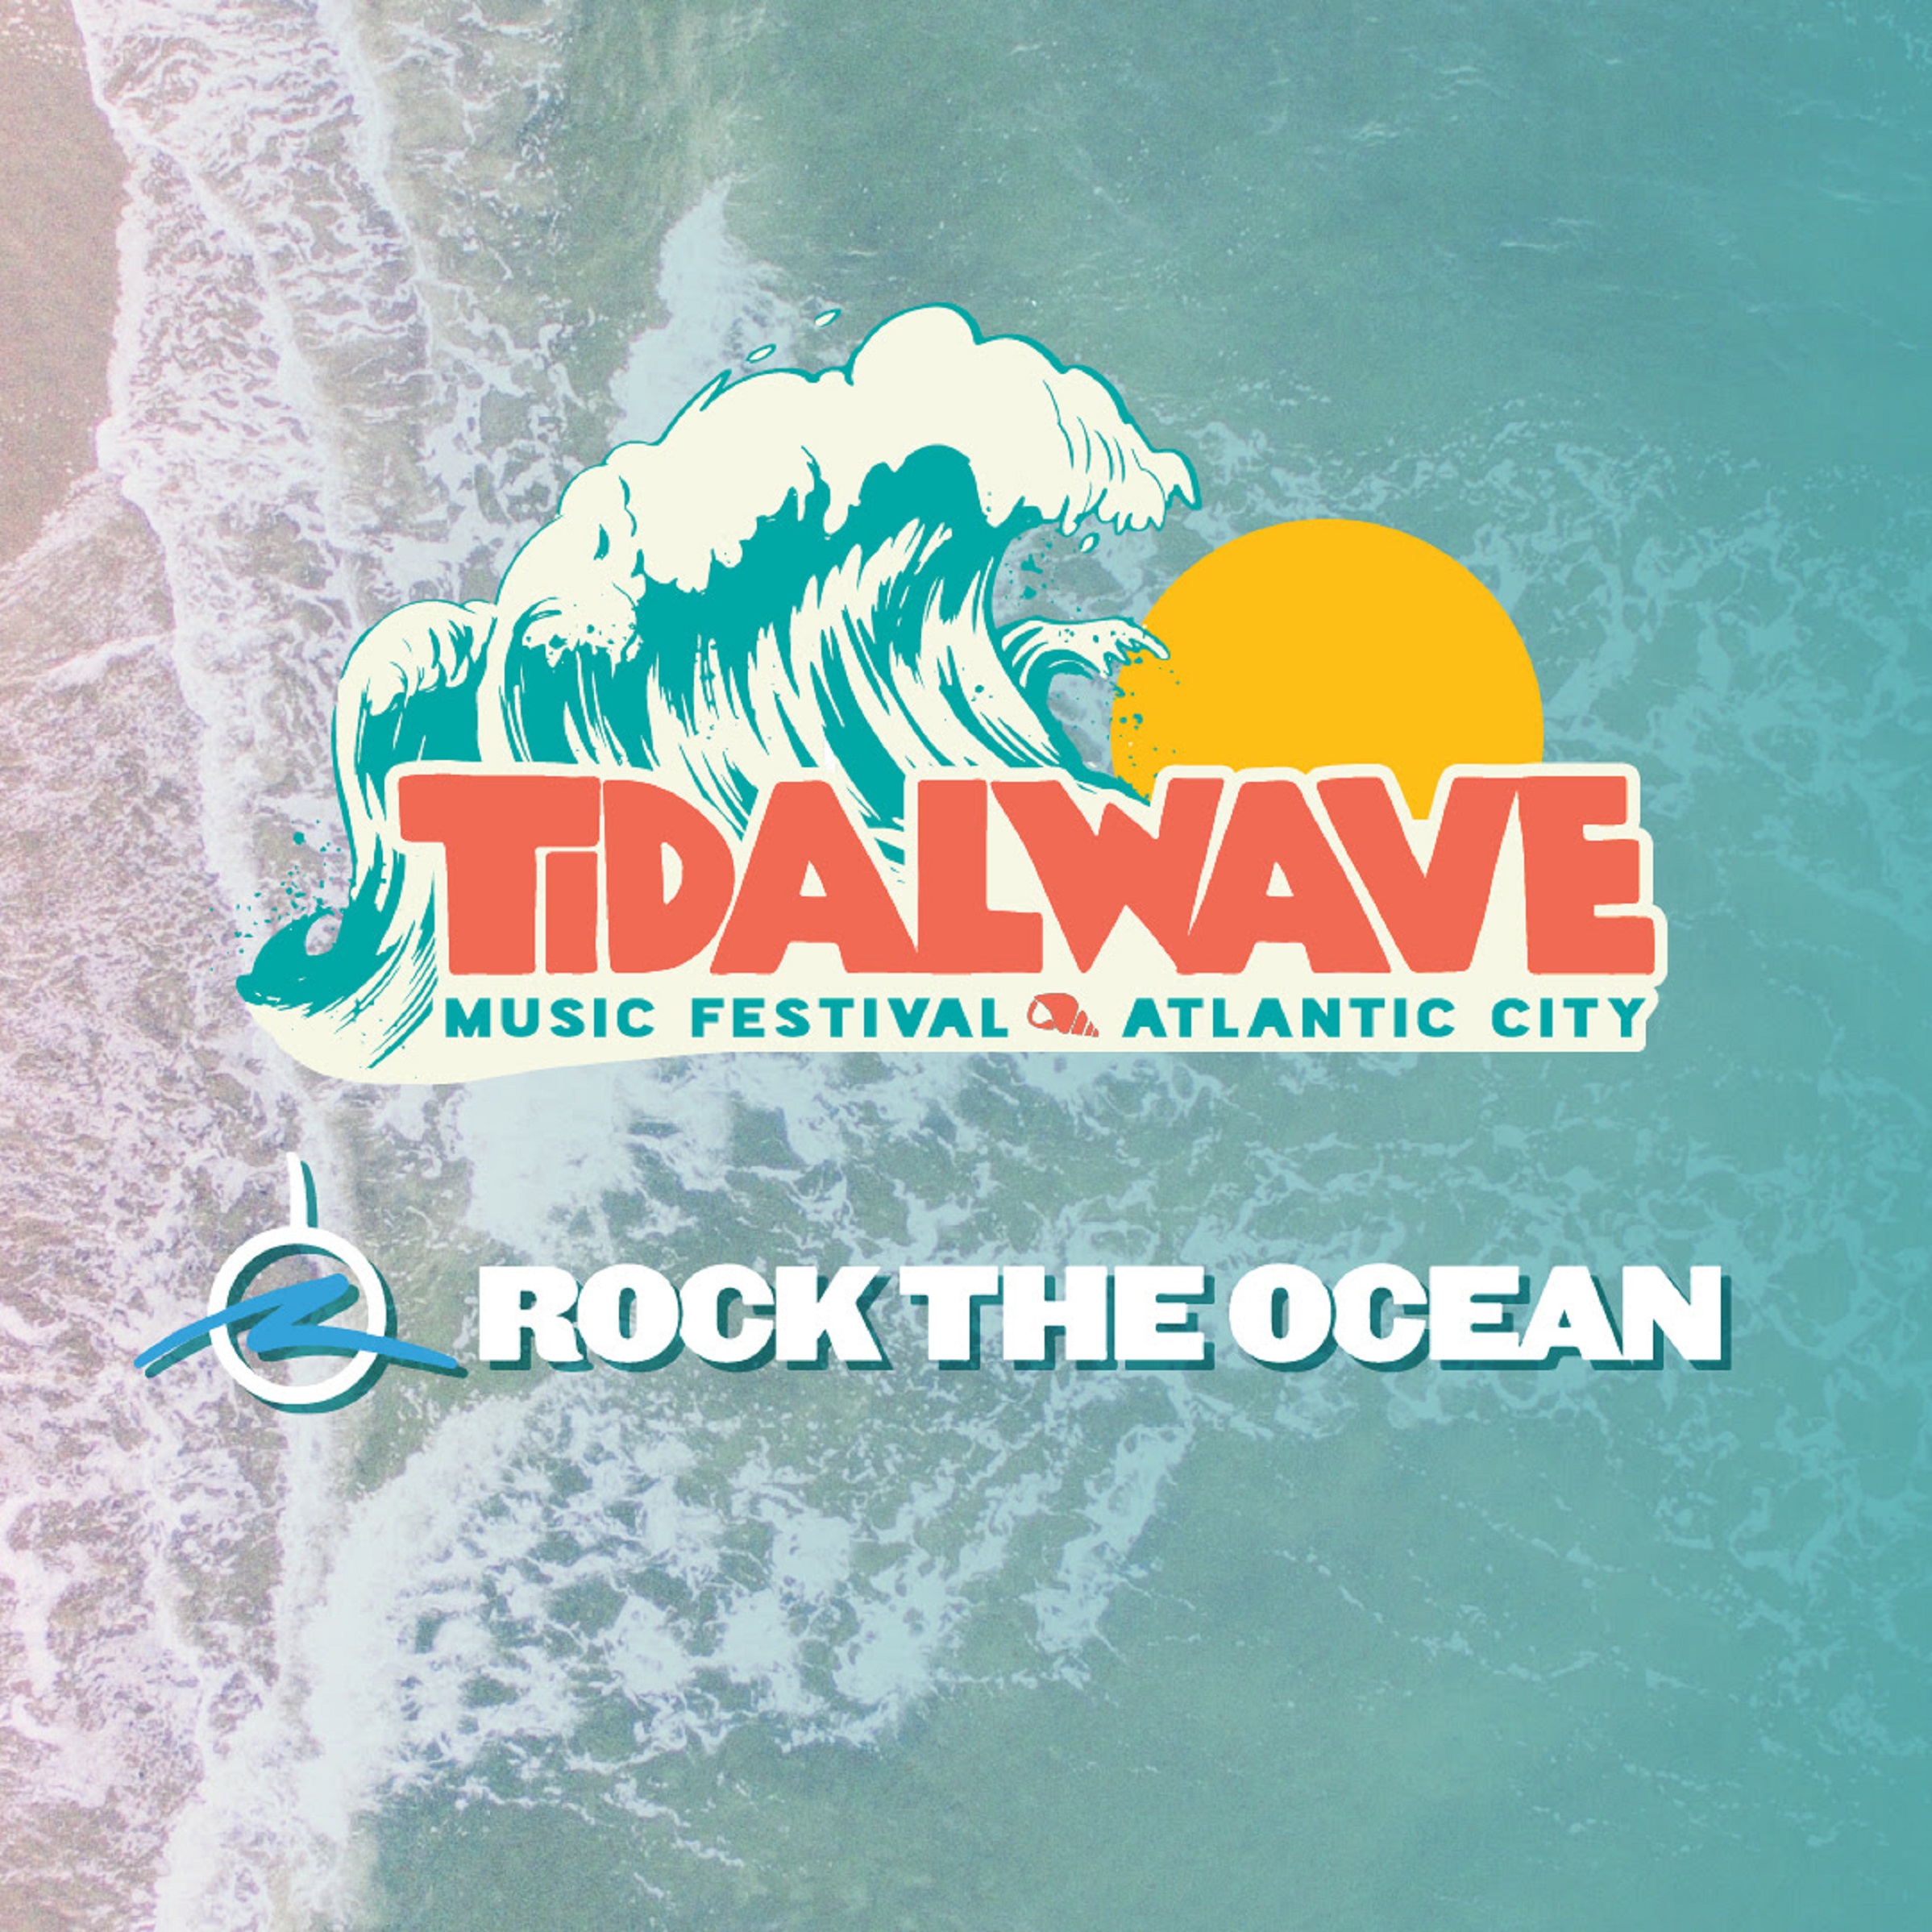 TidalWave Music Festival Partners With Rock The Ocean